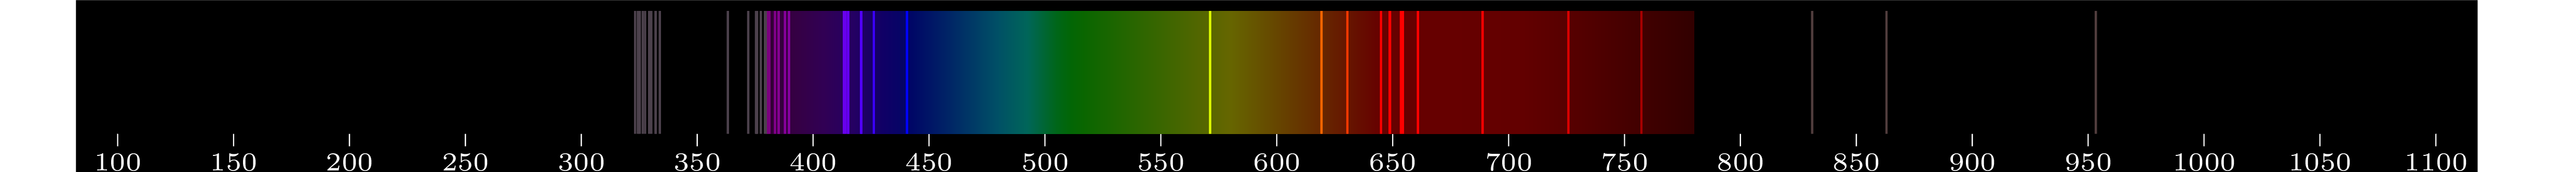 emmision spectra of element Pu